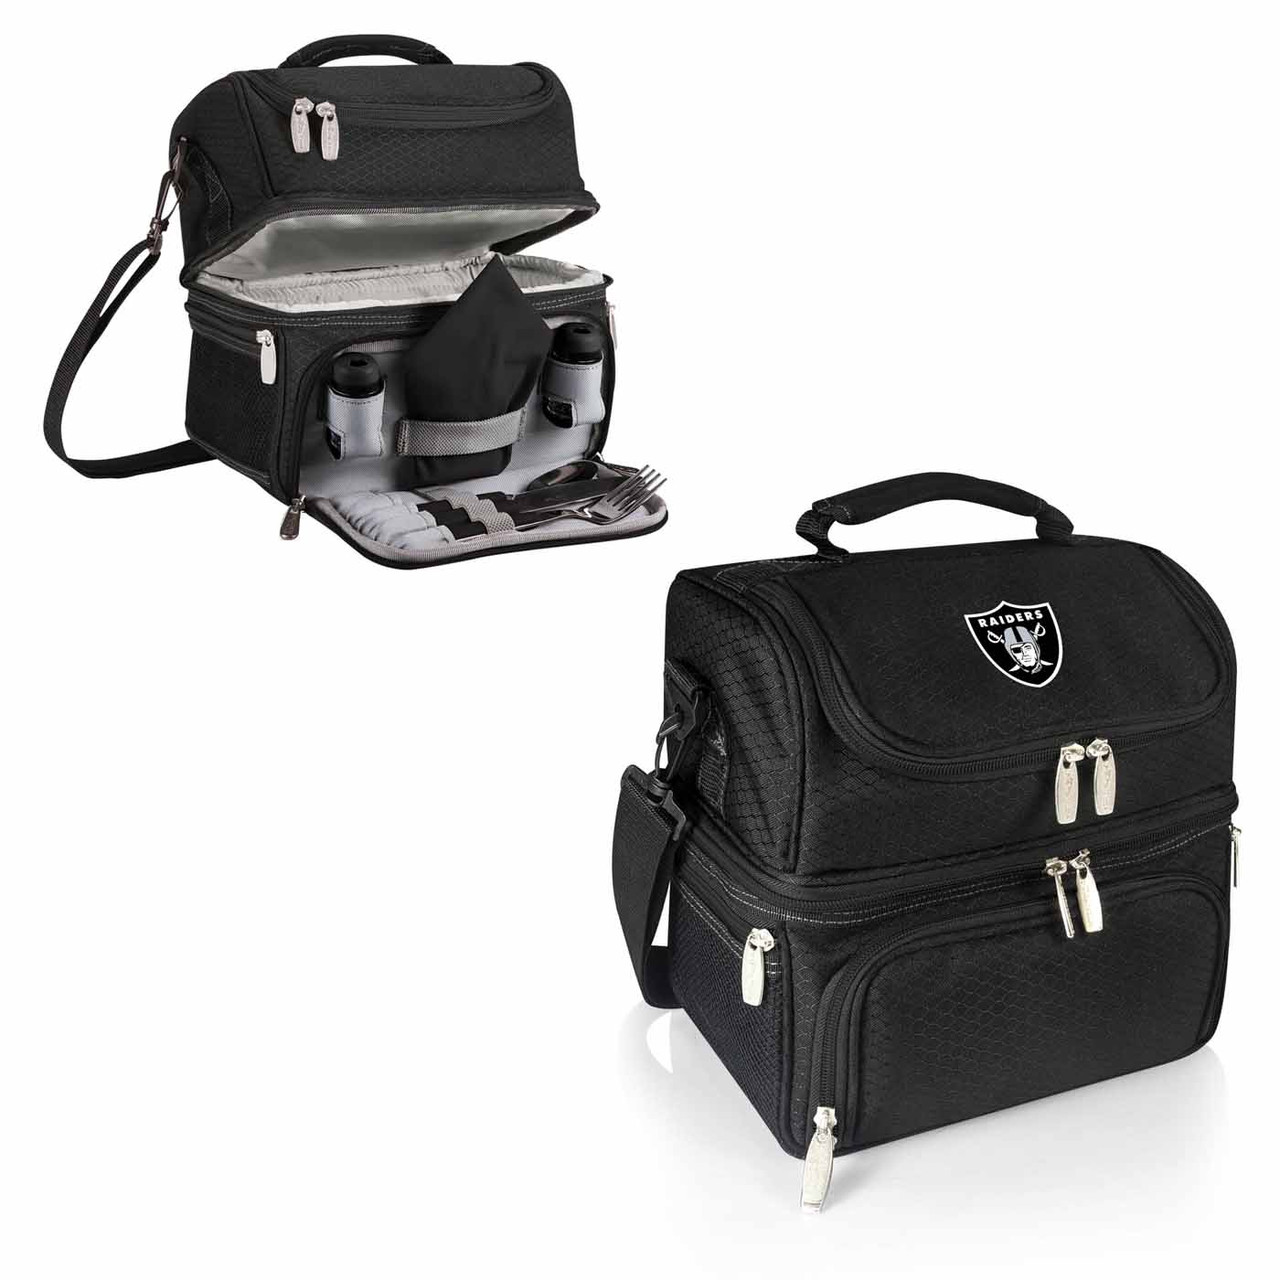 https://cdn11.bigcommerce.com/s-qq5h9nclzt/images/stencil/1280x1280/products/90284/113481/oakland-raiders-black-pranzo-insulated-lunch-box_altimage-01_Full__91242.1686991263.jpg?c=1